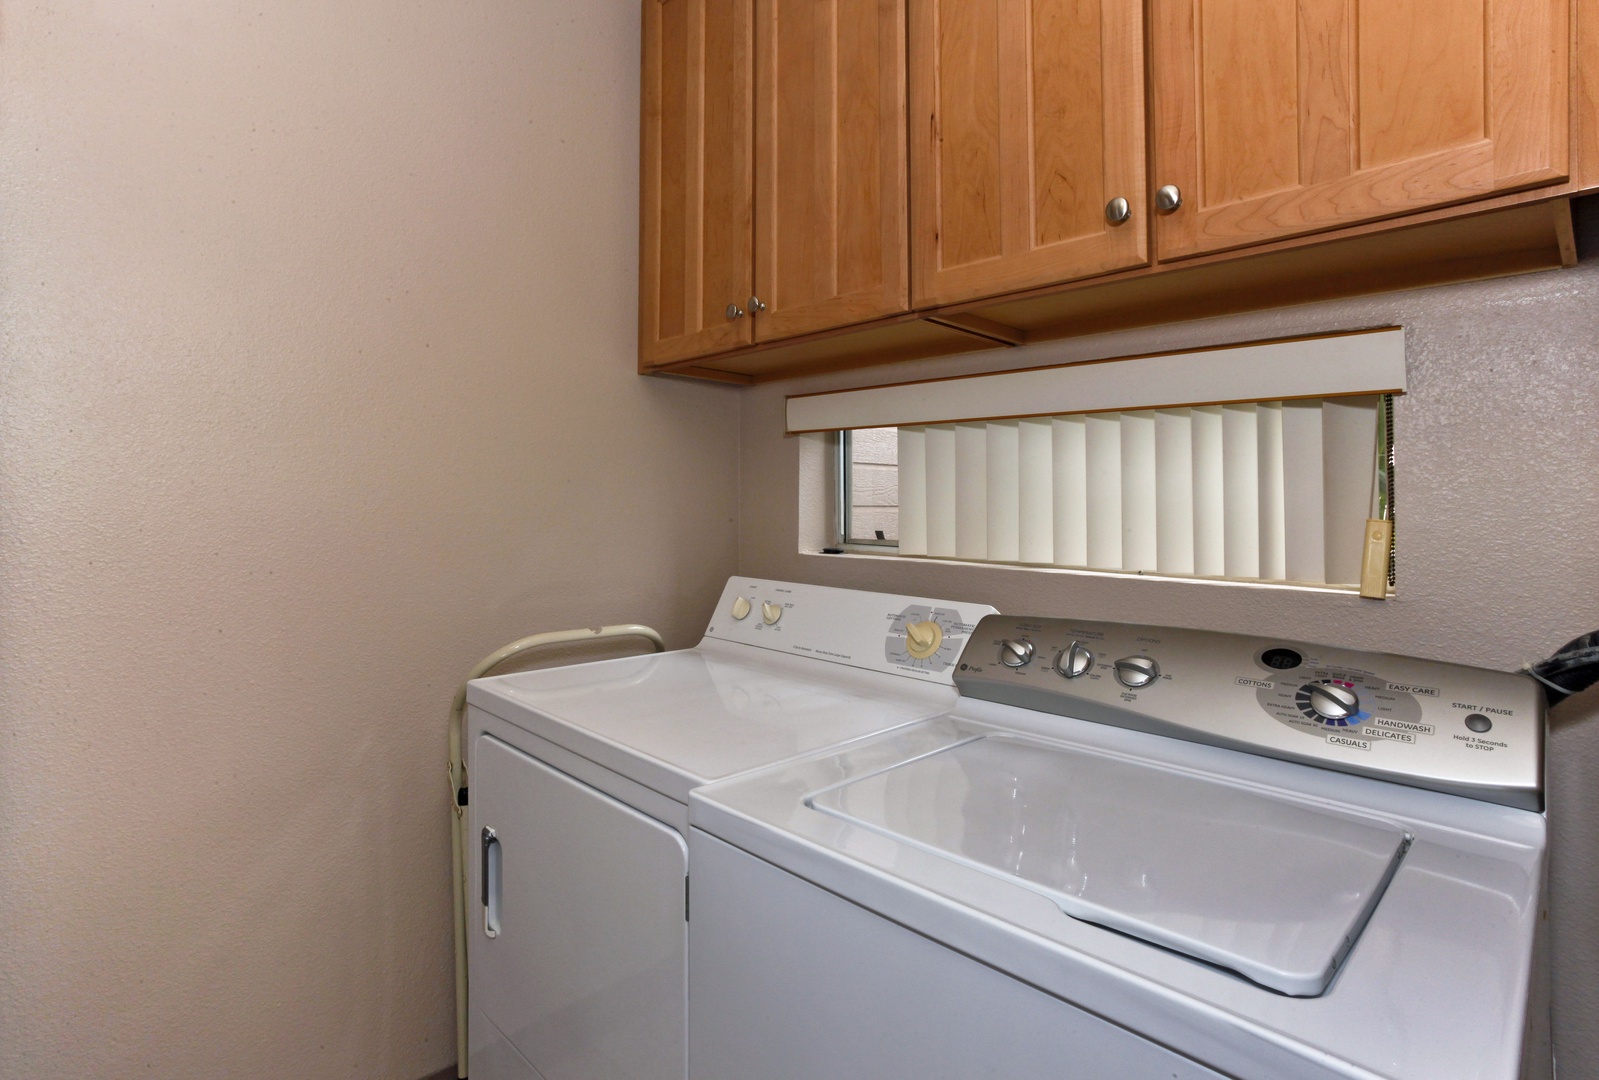 Kapolei Vacation Rentals, Fairways at Ko Olina 33F - The washer and dryer for your convenience.